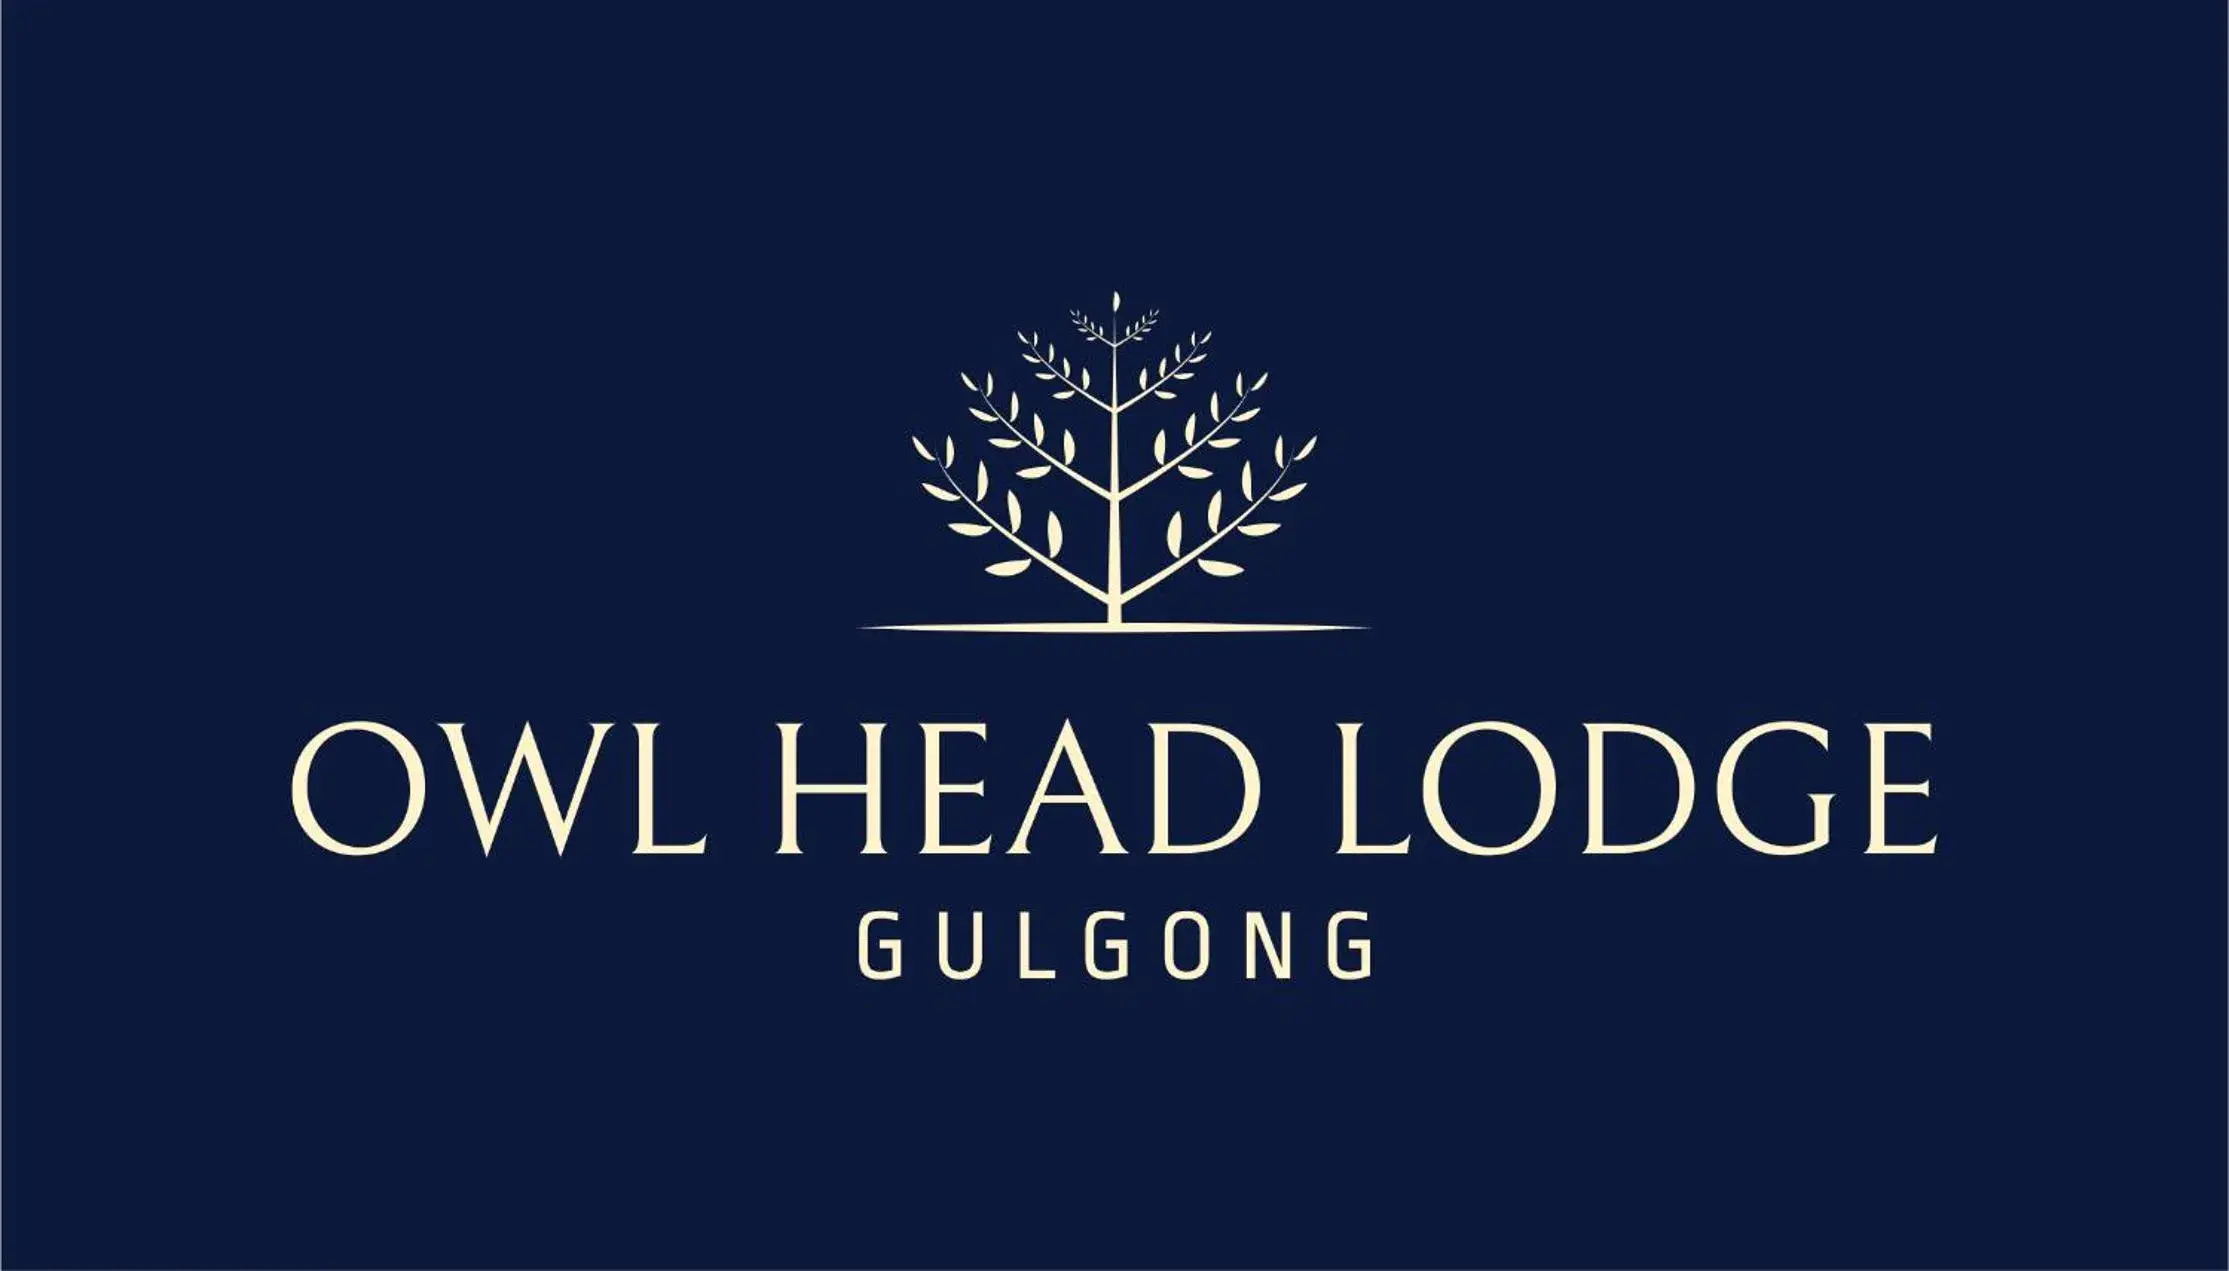 Logo/Certificate/Sign, Property Logo/Sign in Owl Head Lodge